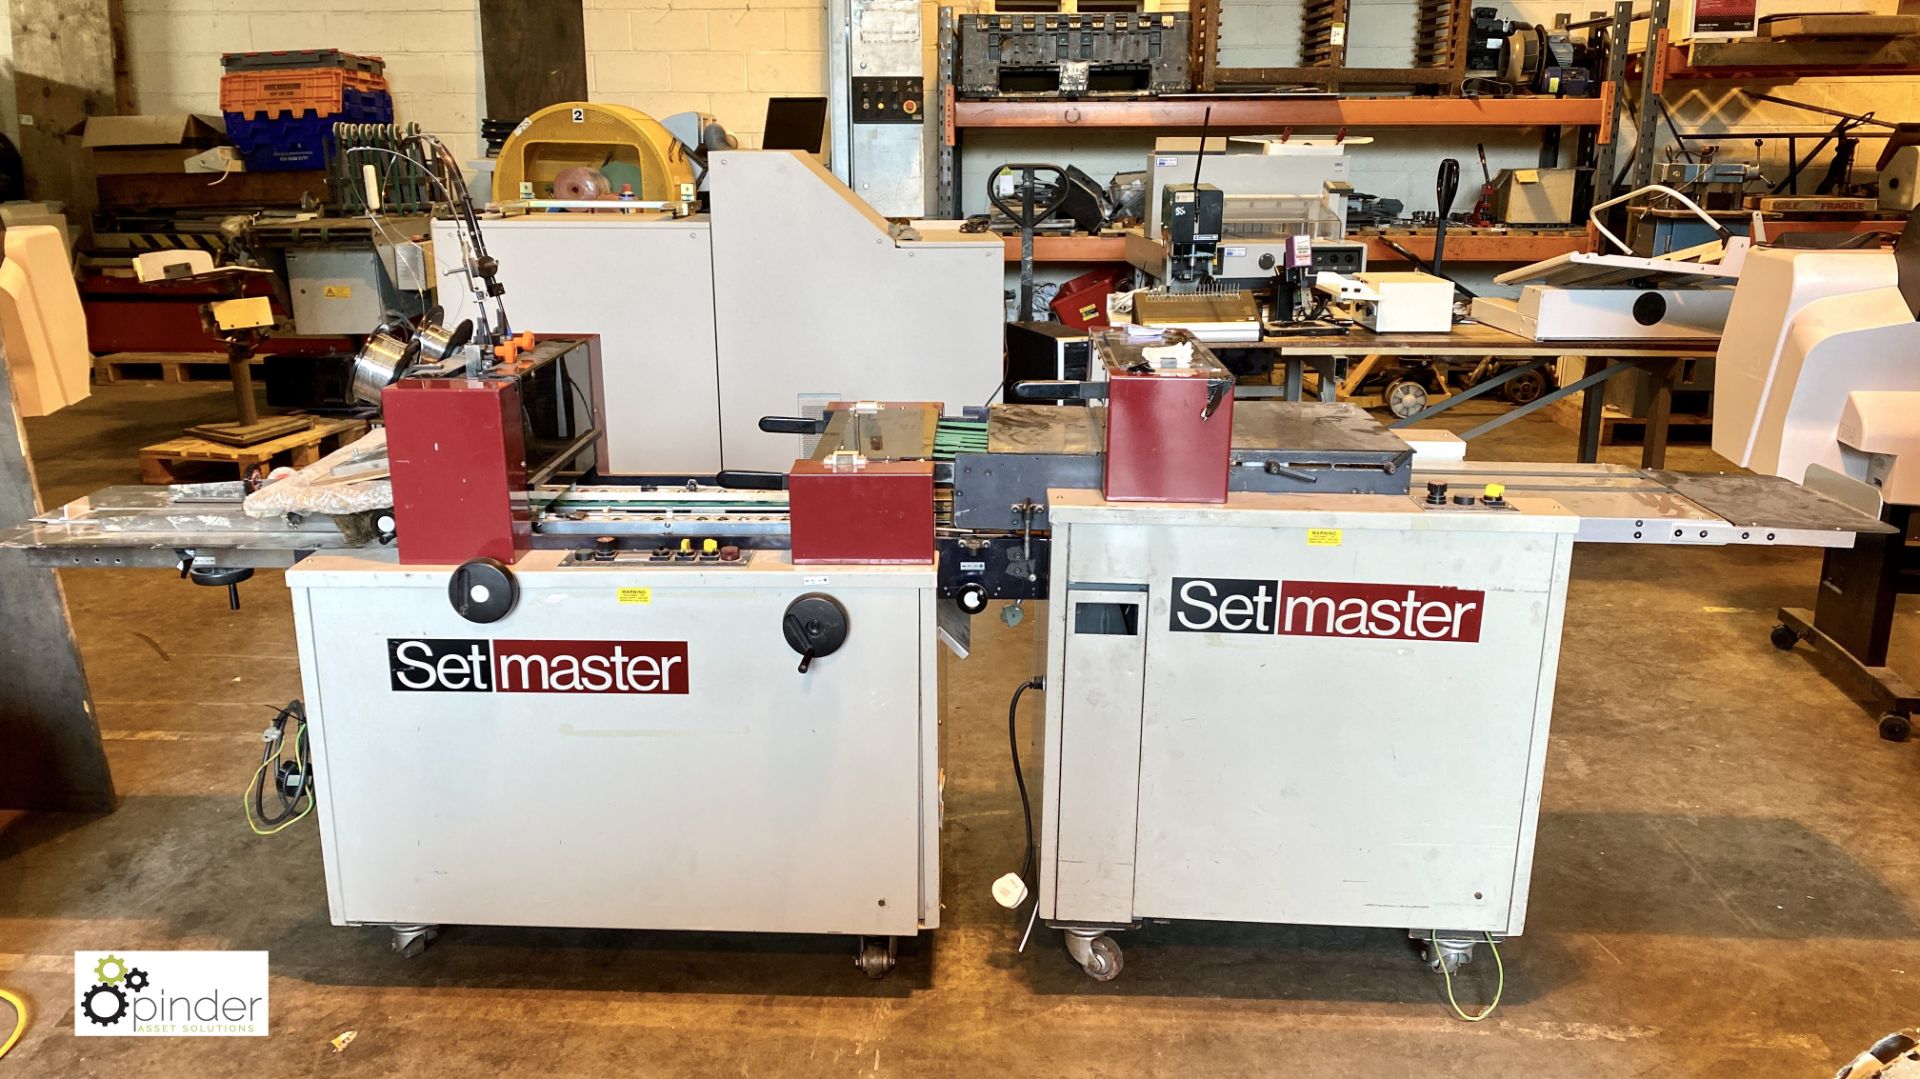 Setmaster Booklet Maker comprising stitching, folding and trimming, counter 4582503, 240volts,